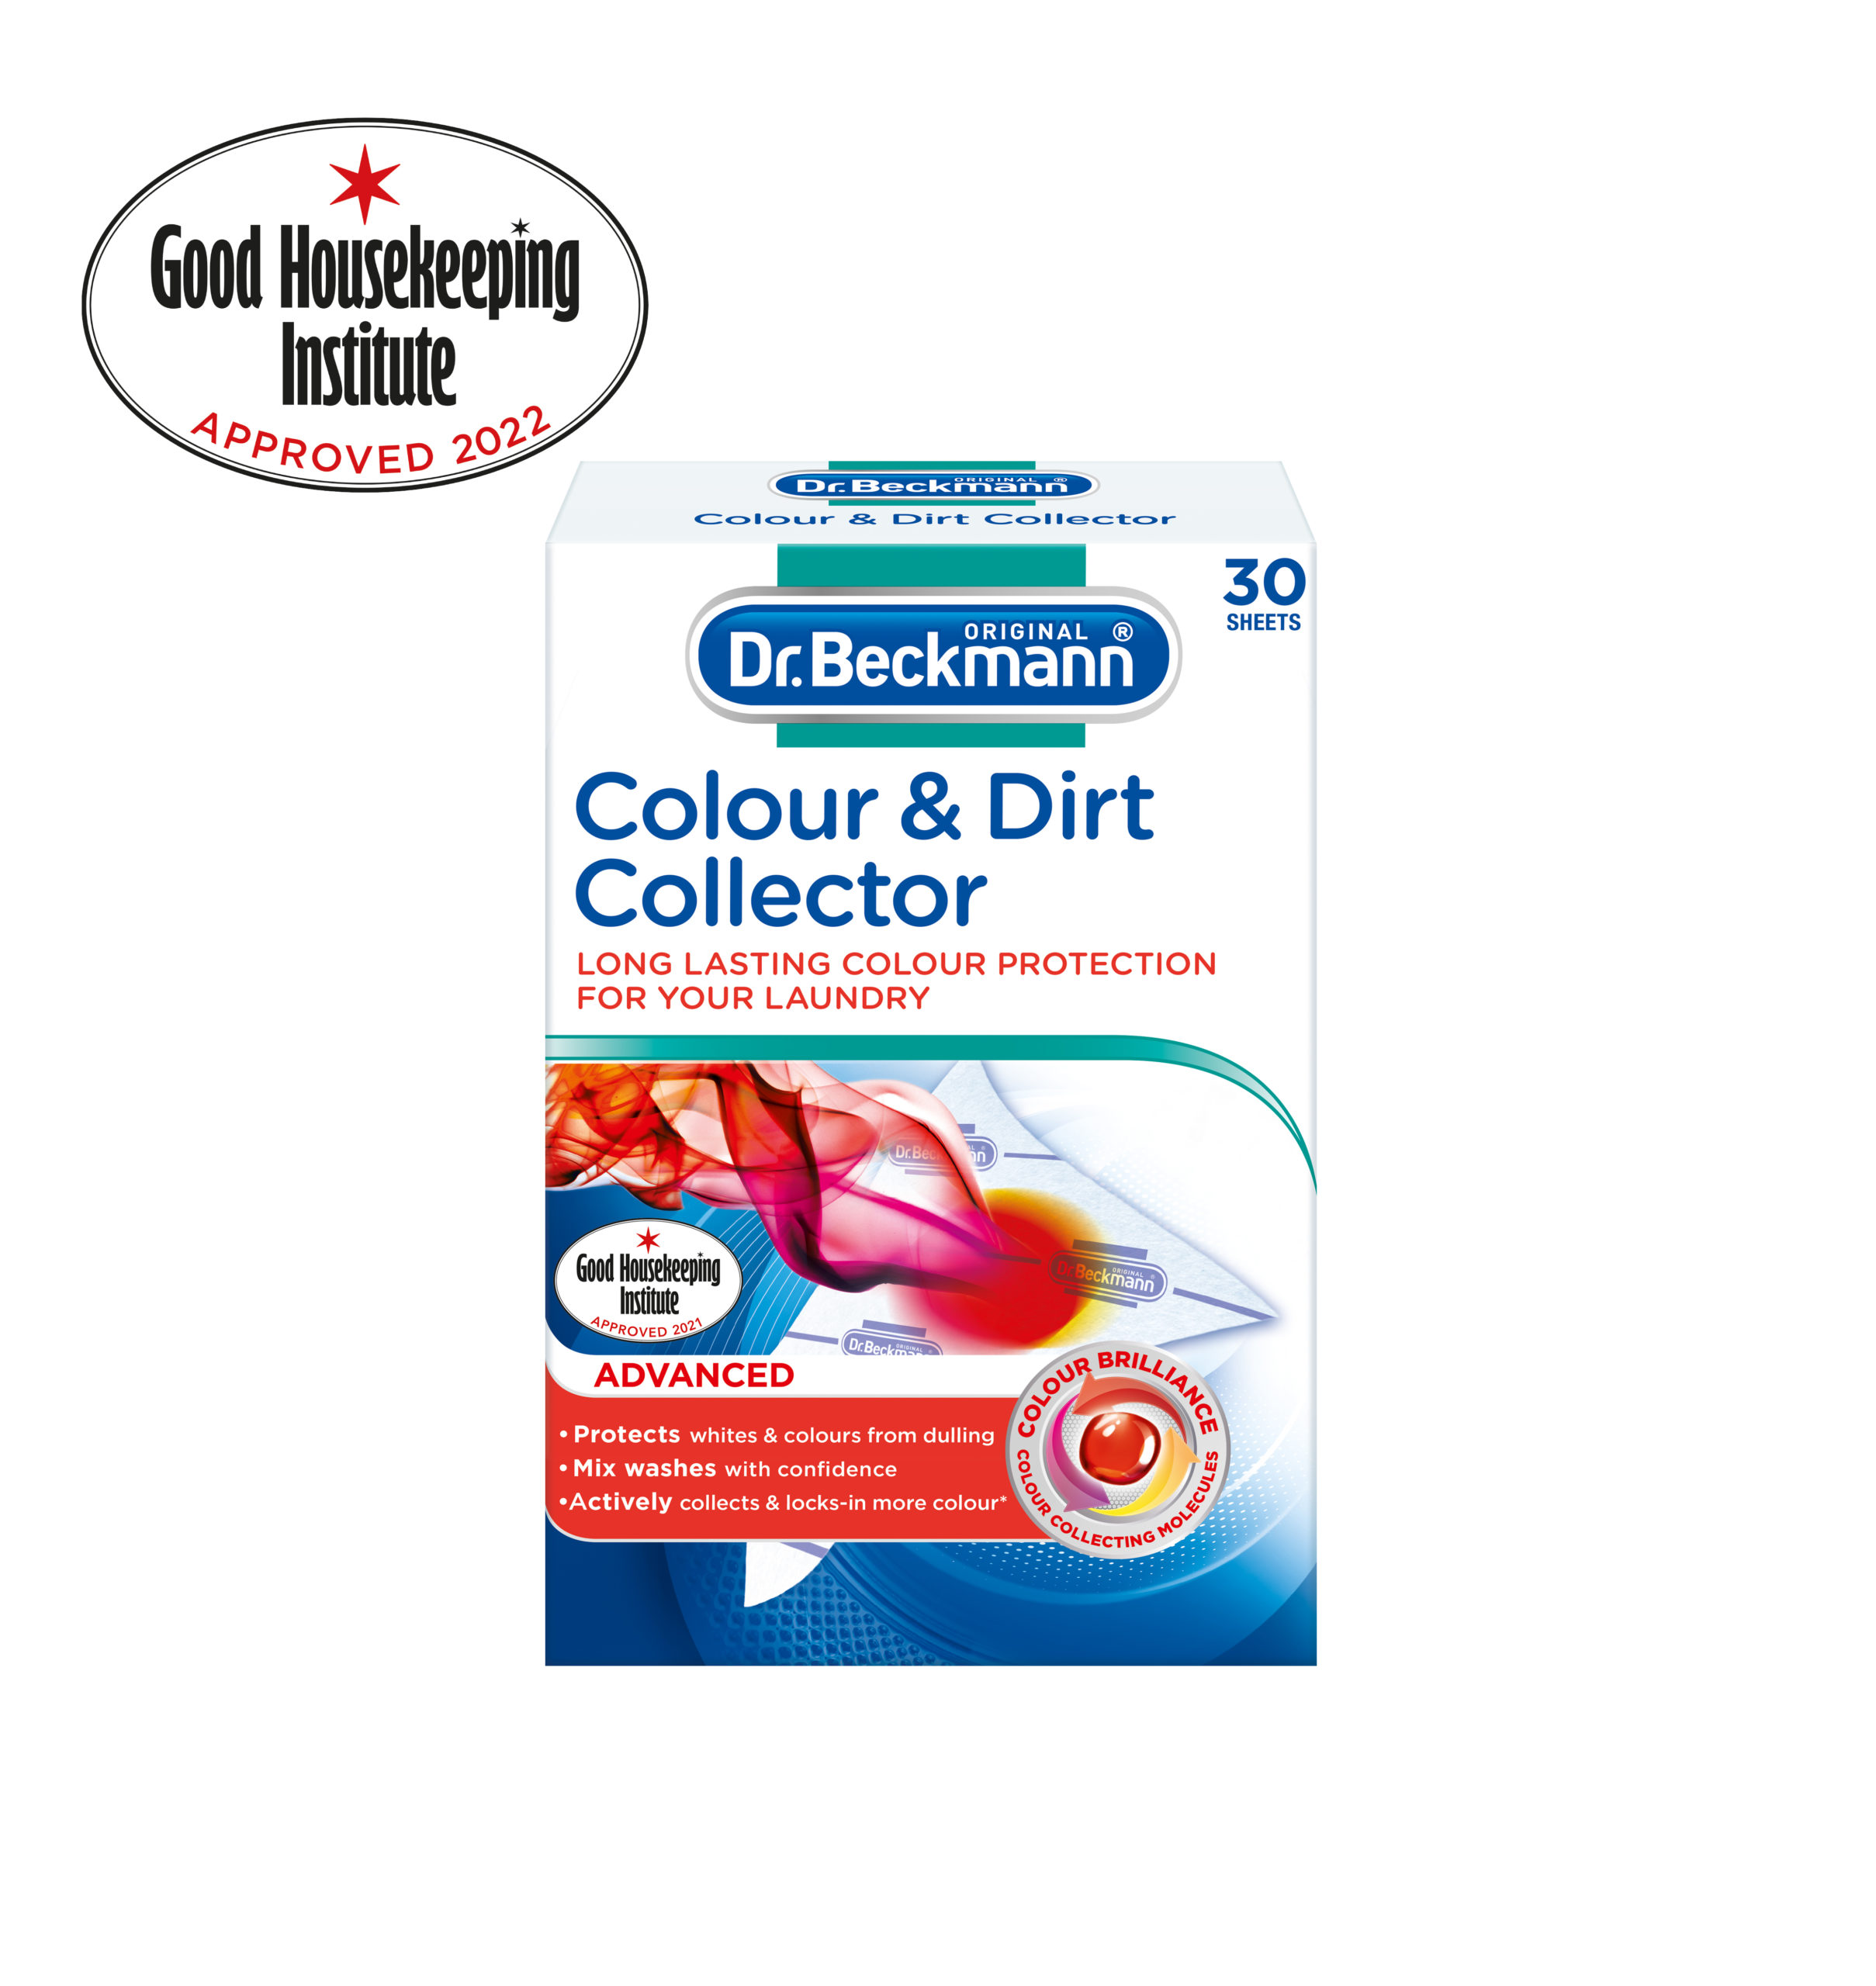 Colour & Dirt Collector Sheets by Dr Beckmann Laundry Cleaning Fabric Stains 